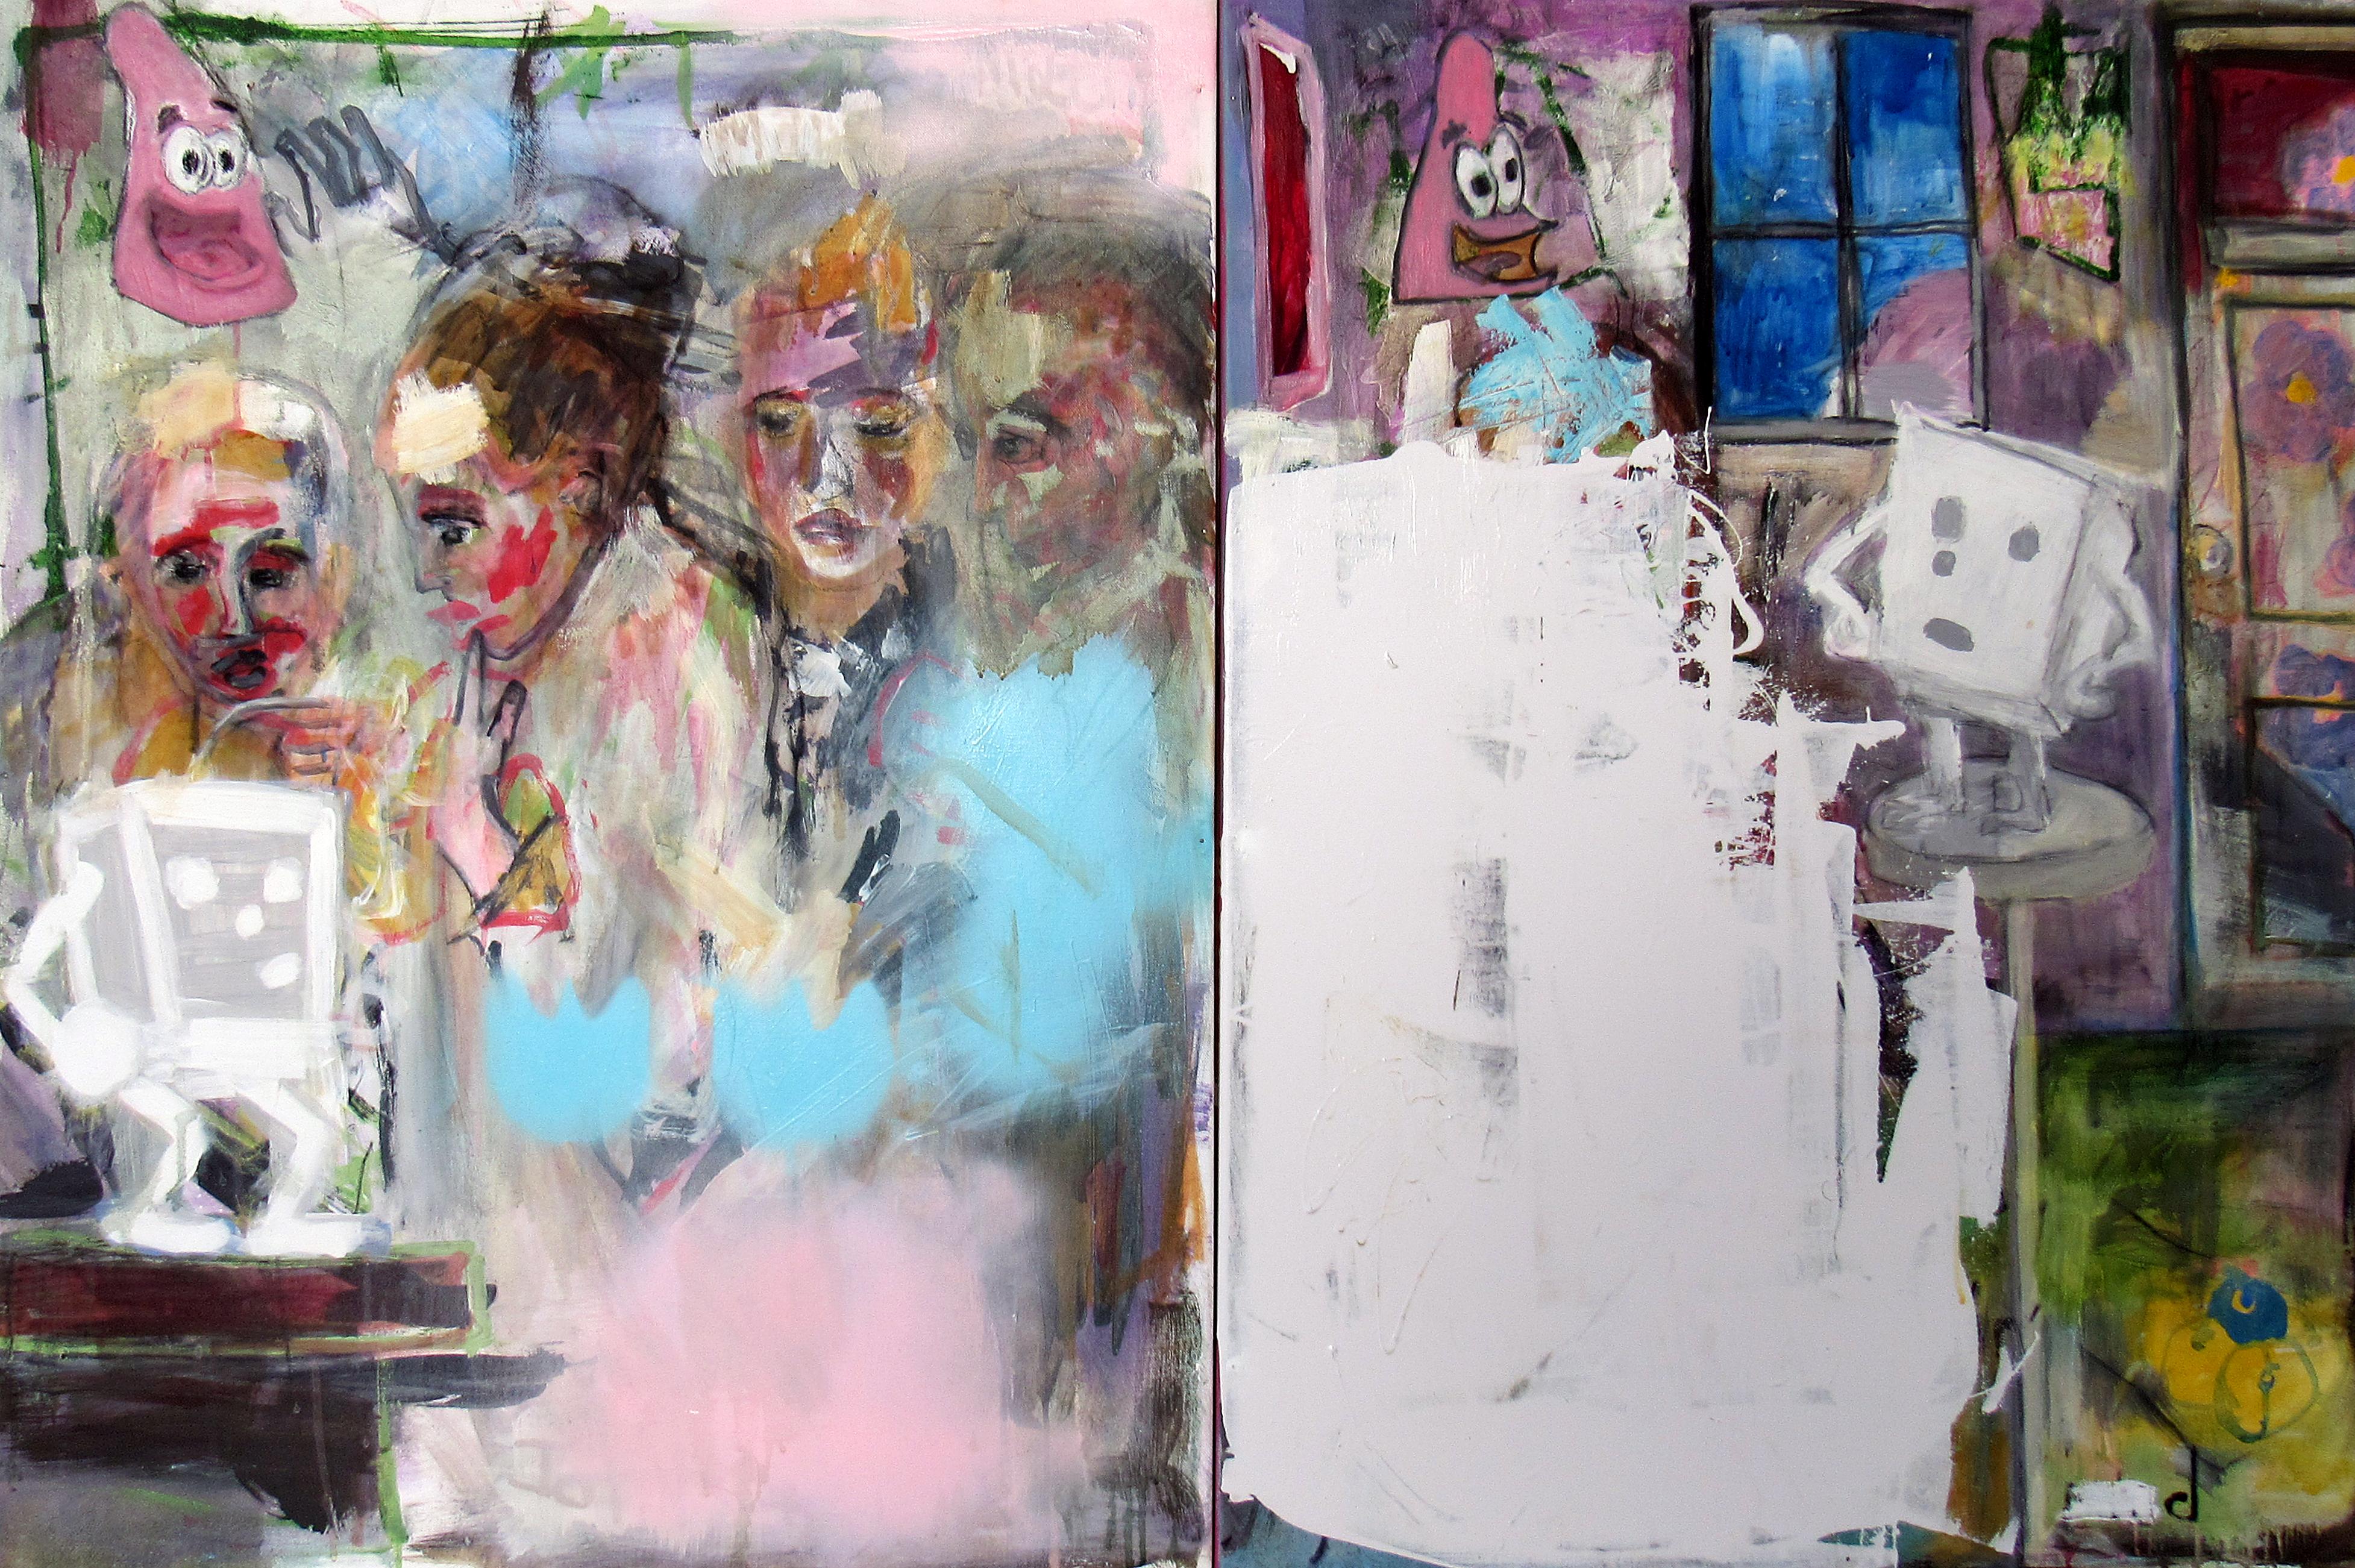 The Four Evangelists, Figure colorful Abstract diptych face and cartoon elements - Gray Figurative Painting by C. Dimitri